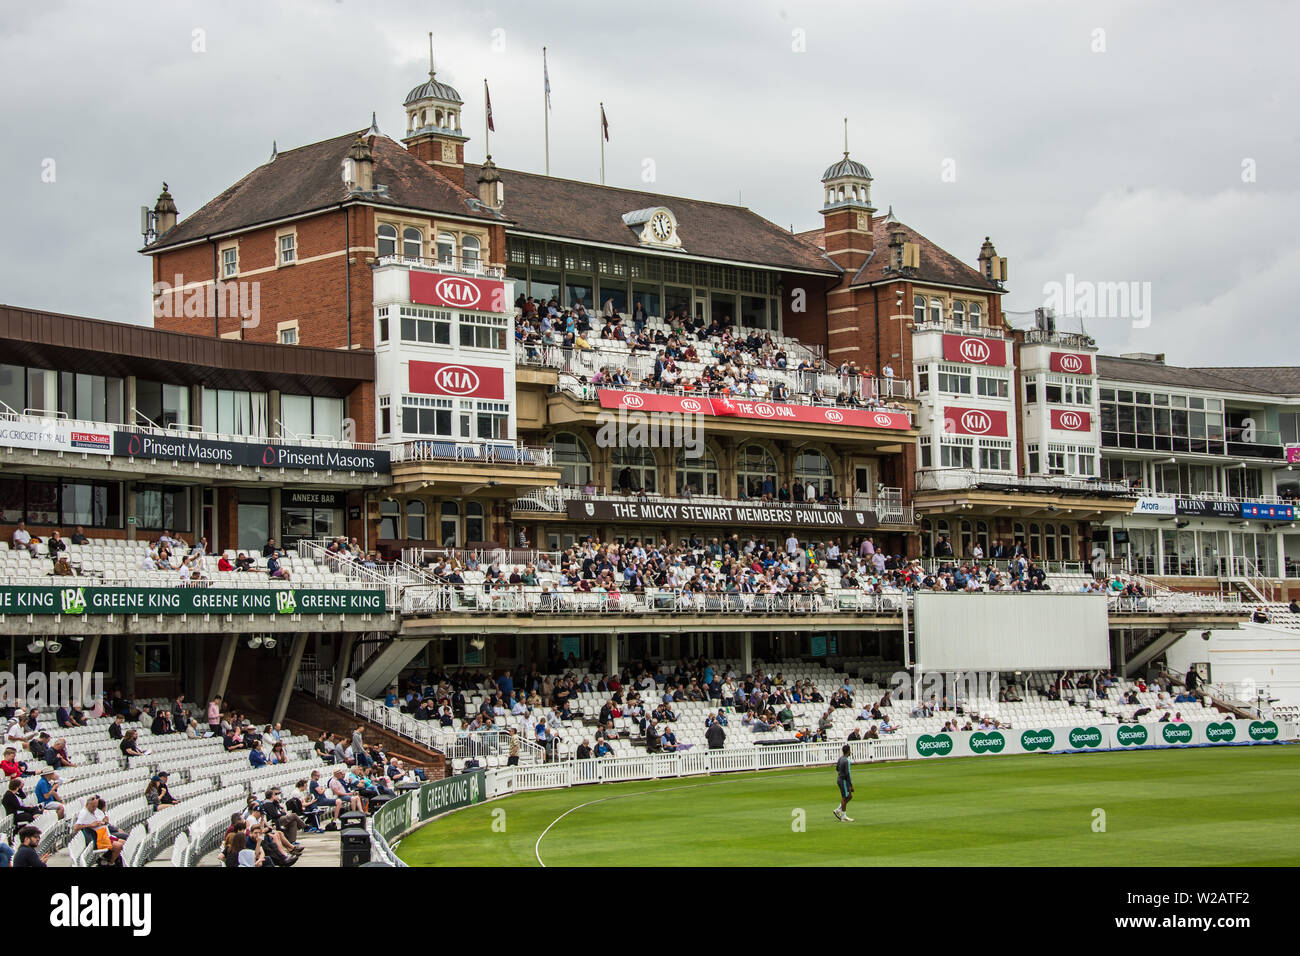 London, UK. 7 July, 2019. The Micky Stewart Members' Pavilion ahead of the first day of the Specsavers County Championship game between Surrey and Kent at the Kia Oval. David Rowe/Alamy Live News Stock Photo